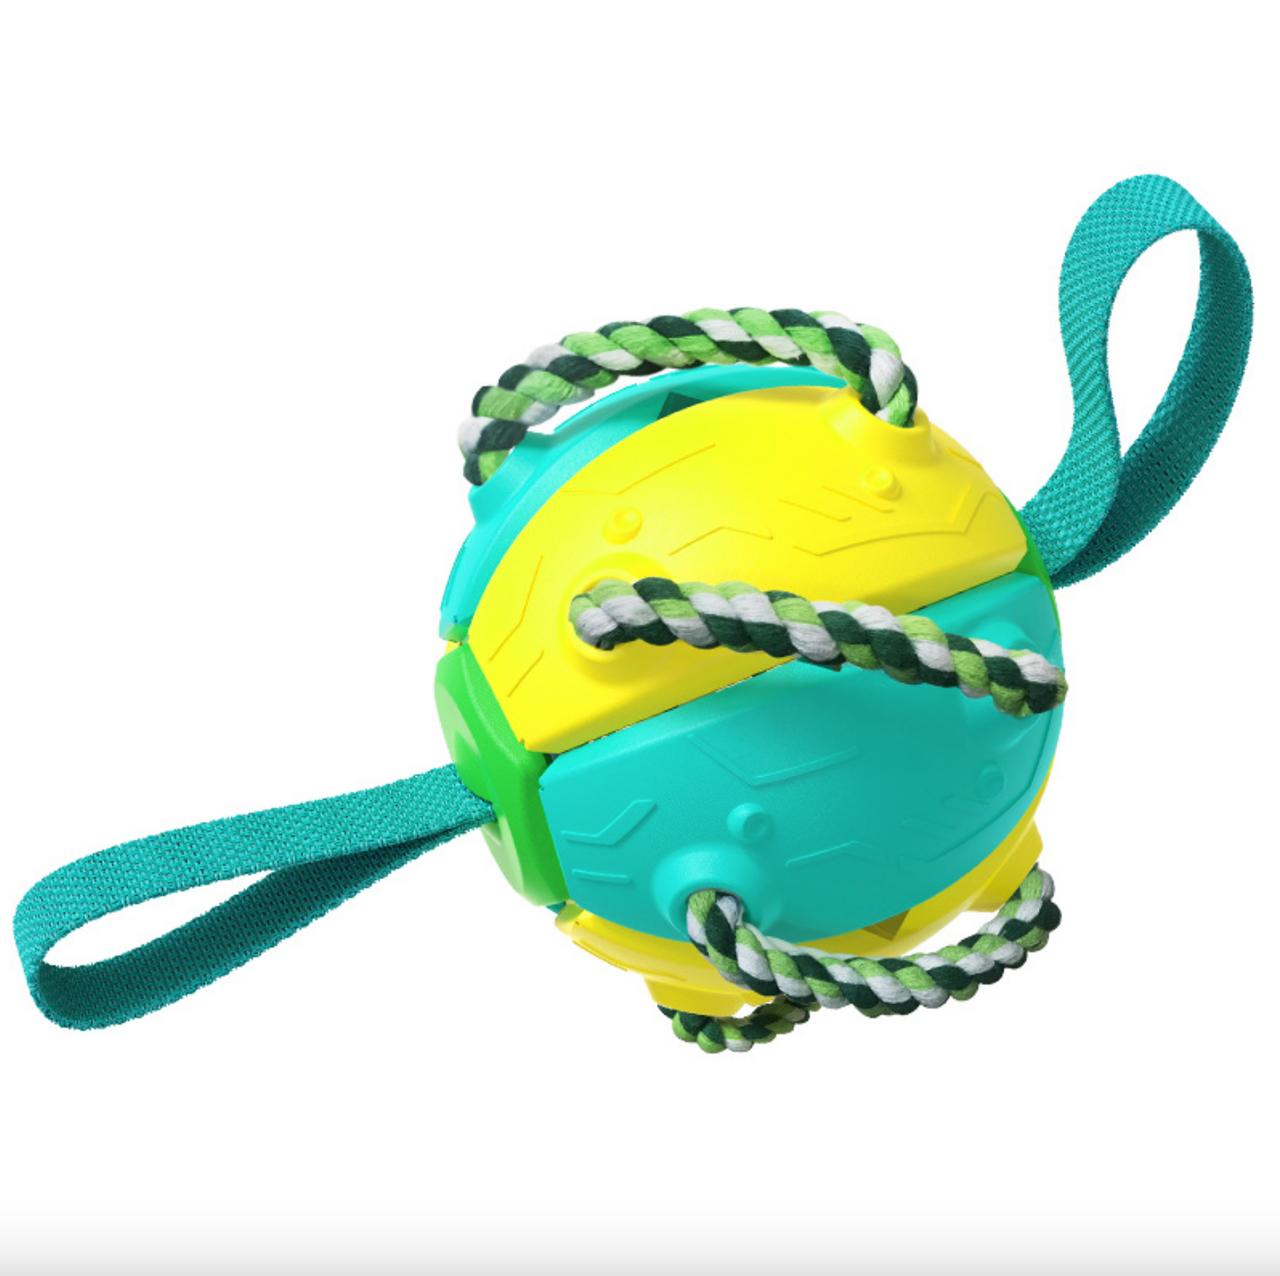 Outdoor Interactive Frisbee: A bite-resistant dog toy for soccer and play JonxiFon